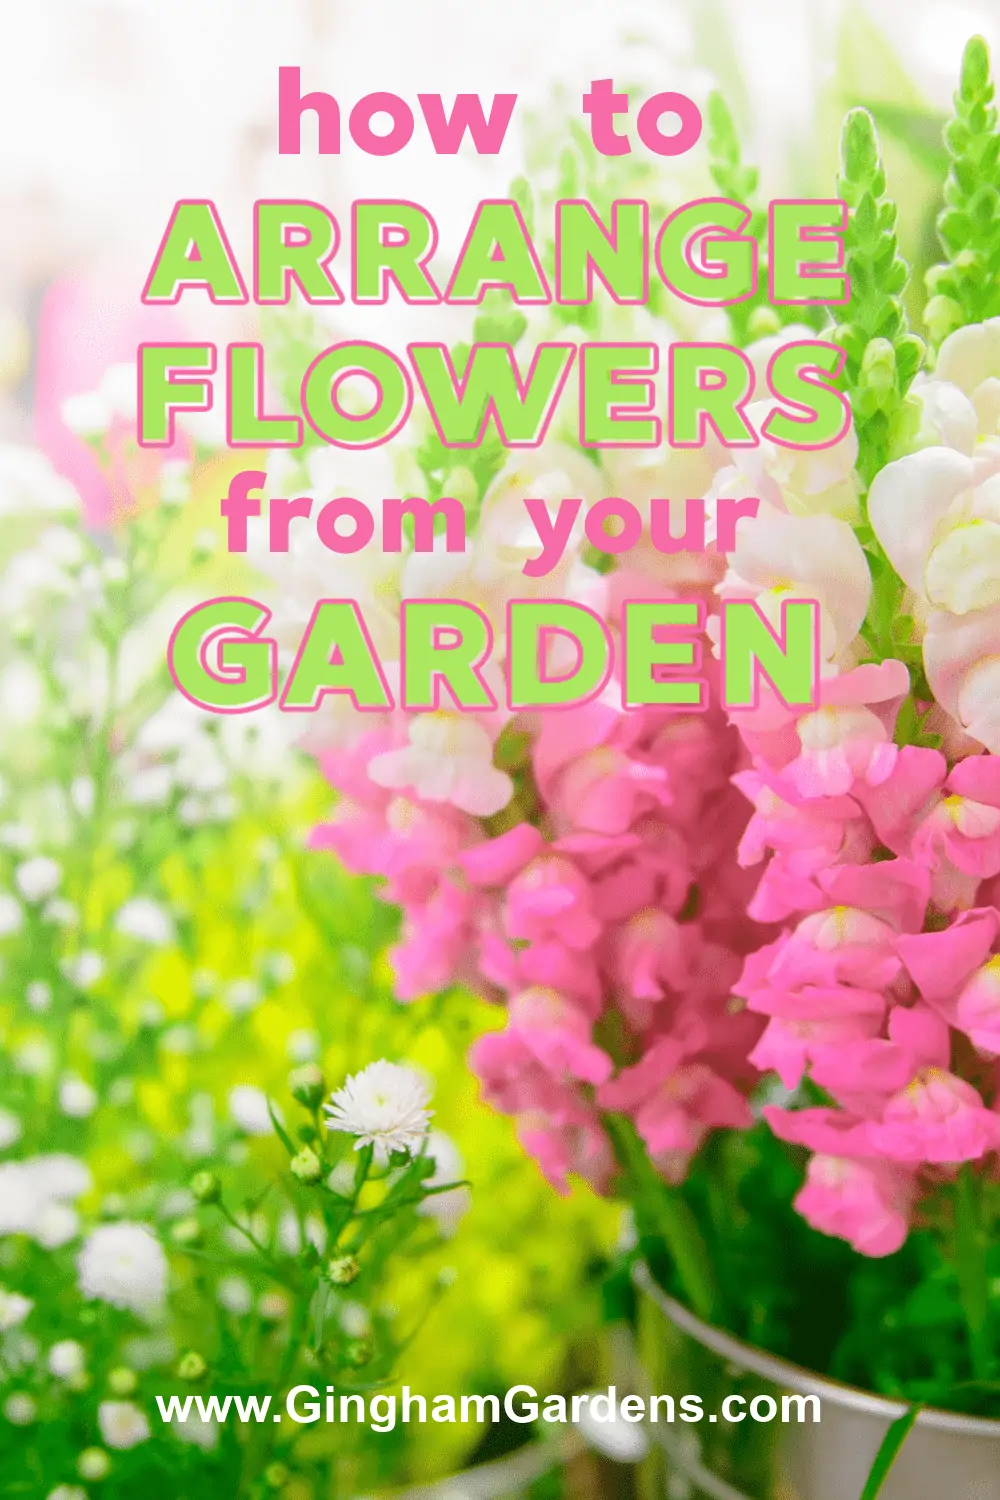 Image of beautiful pink snapdragons with text overlay - how to arrange flowers from your garden